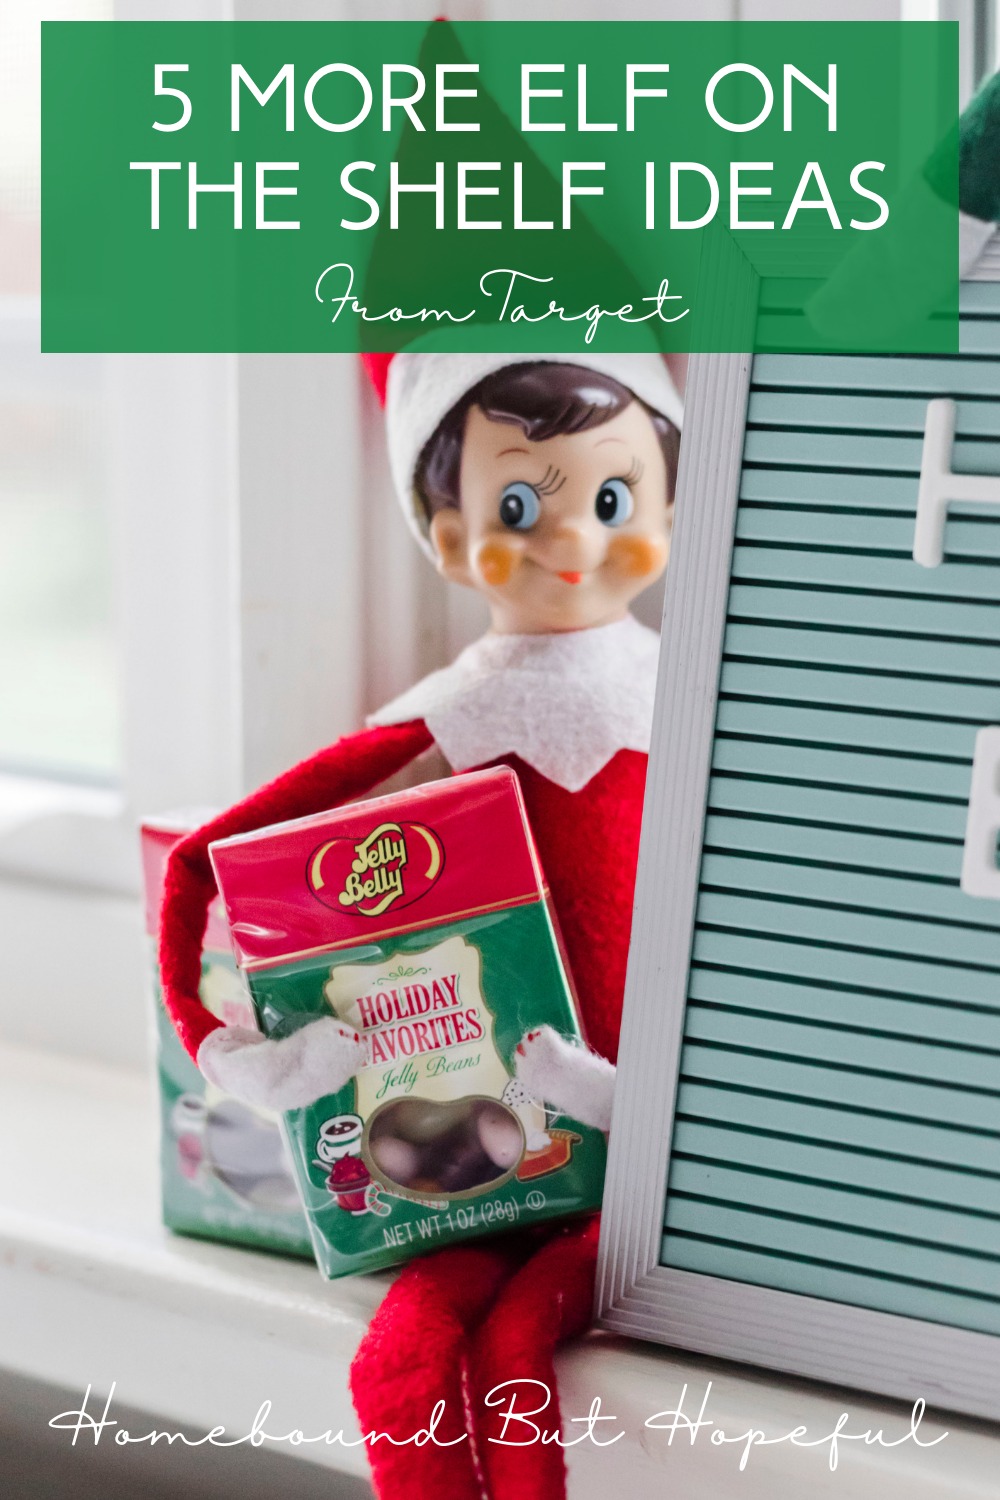 The elves are coming! Get ready with 5 more Elf on the Shelf ideas using goodies from Target!